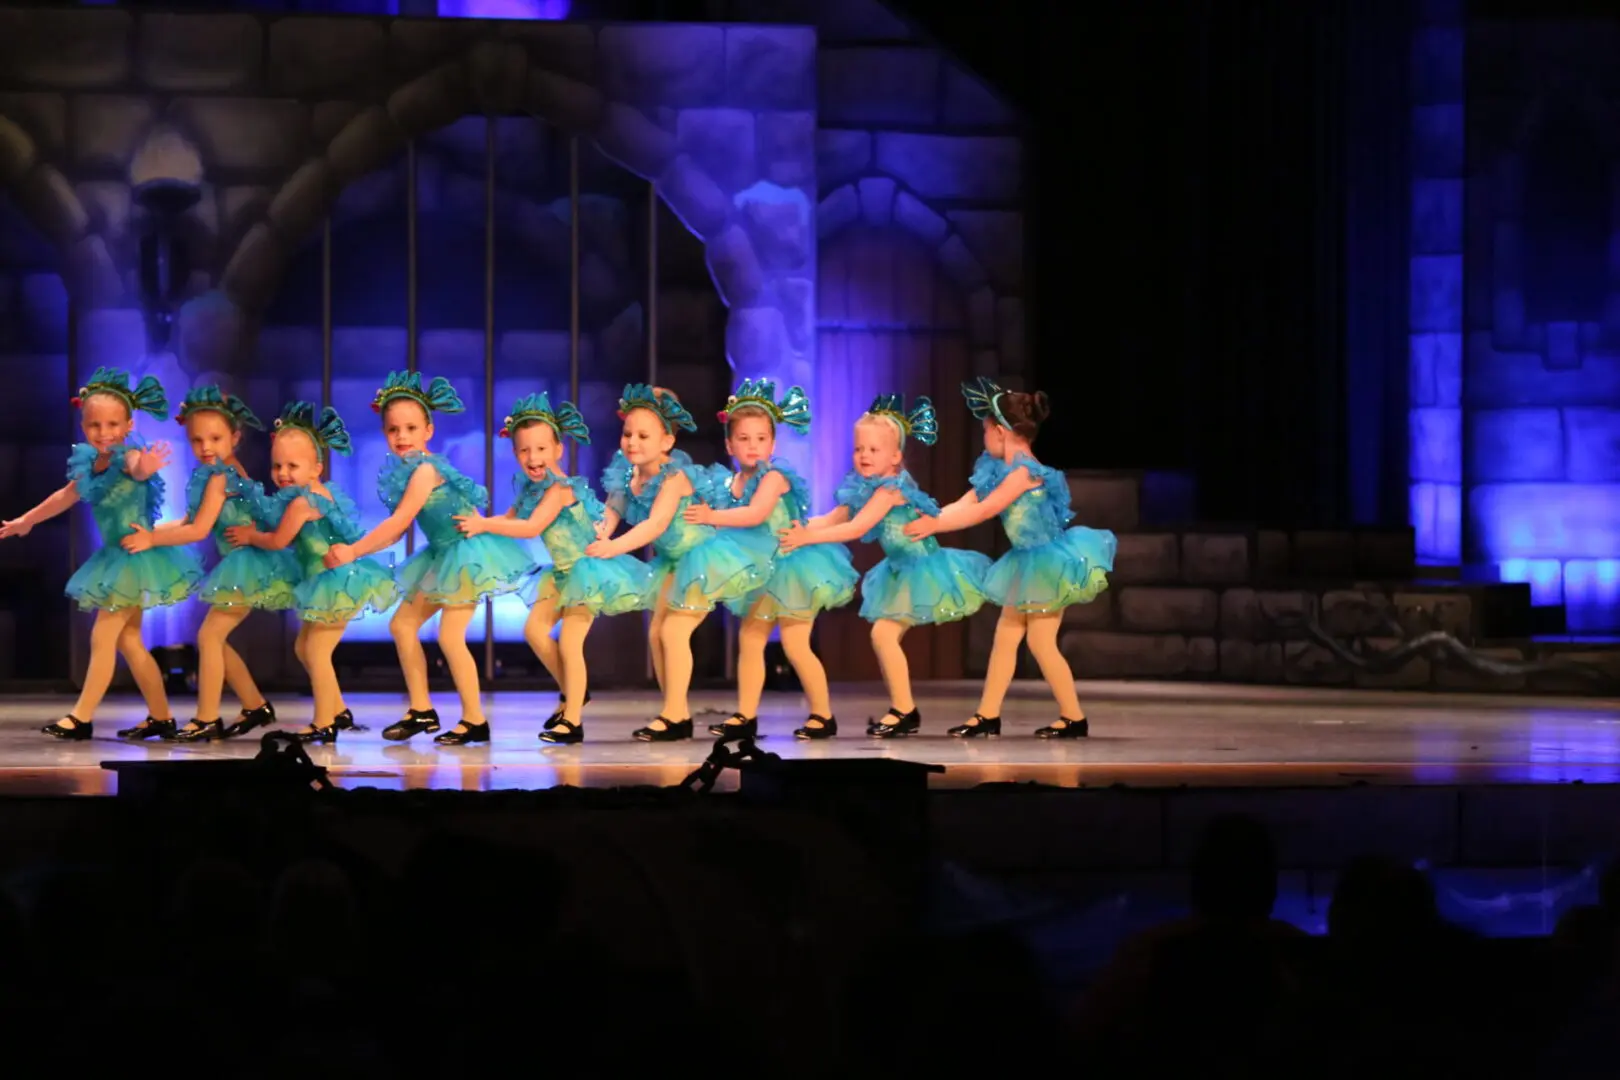 A group of little girls in blue dresses on stage.